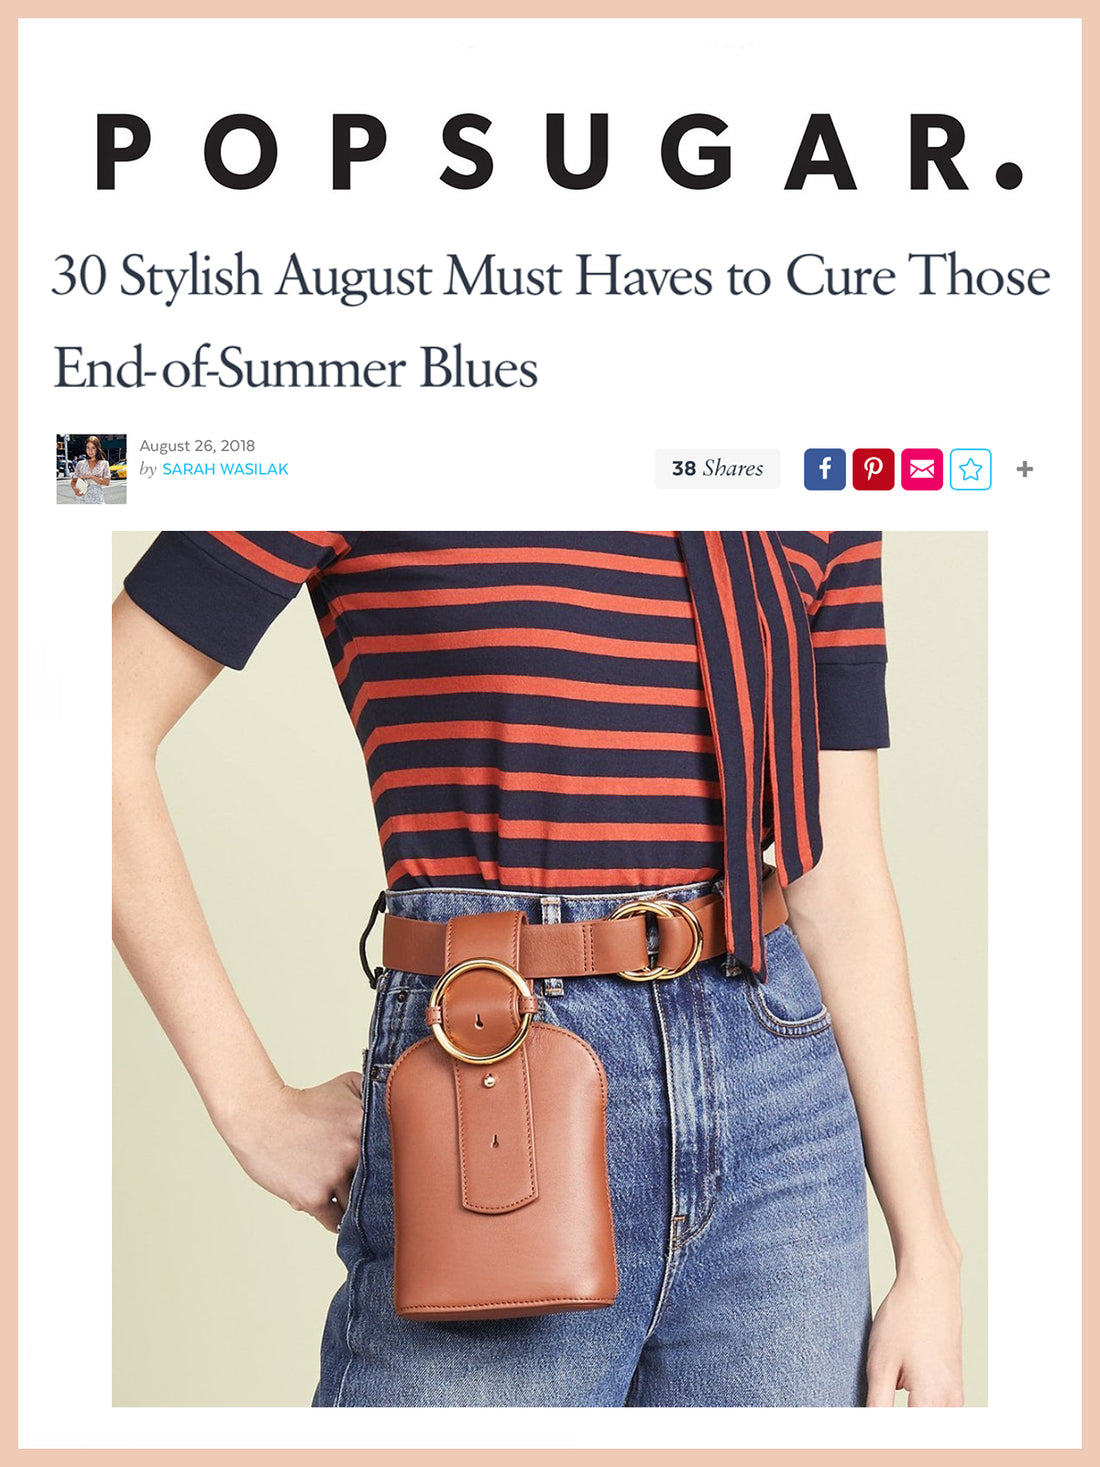 POPSUGAR, 30 Stylish August Must Haves to Cure Those End-of-Summer Blues